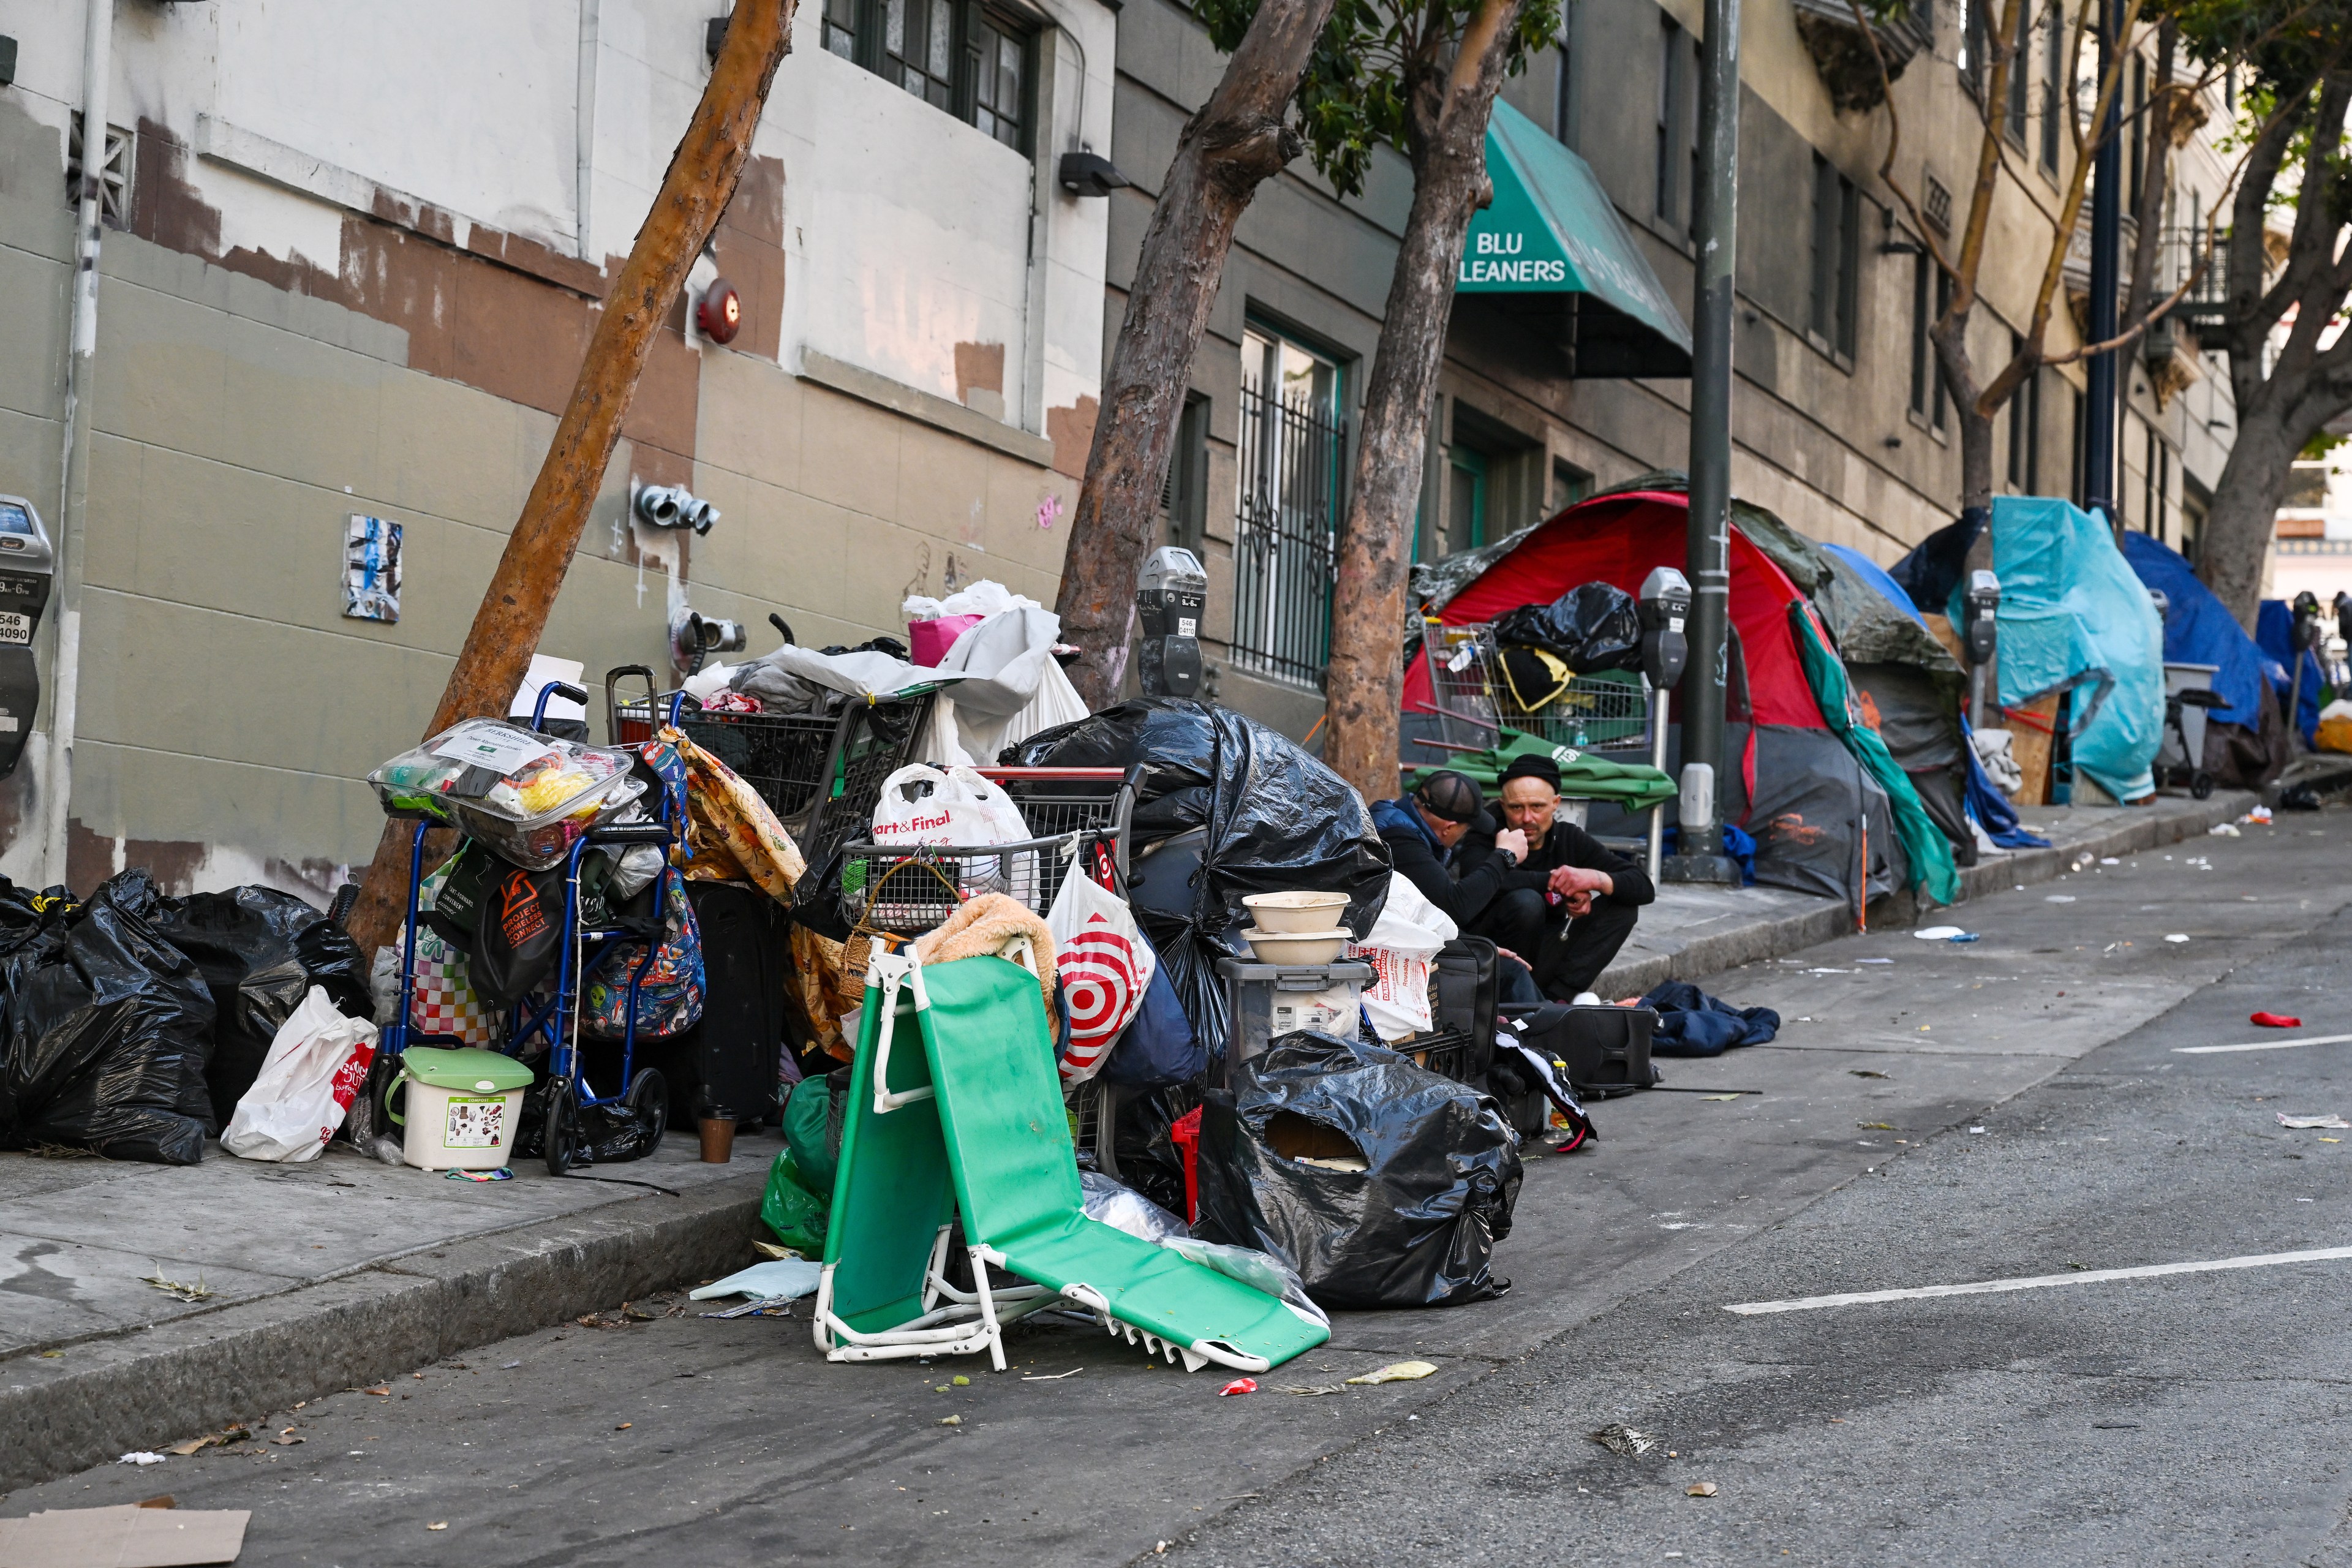 A city street lined with makeshift shelters and heaps of belongings. Two men sit amidst the clutter, one holding a cigarette.